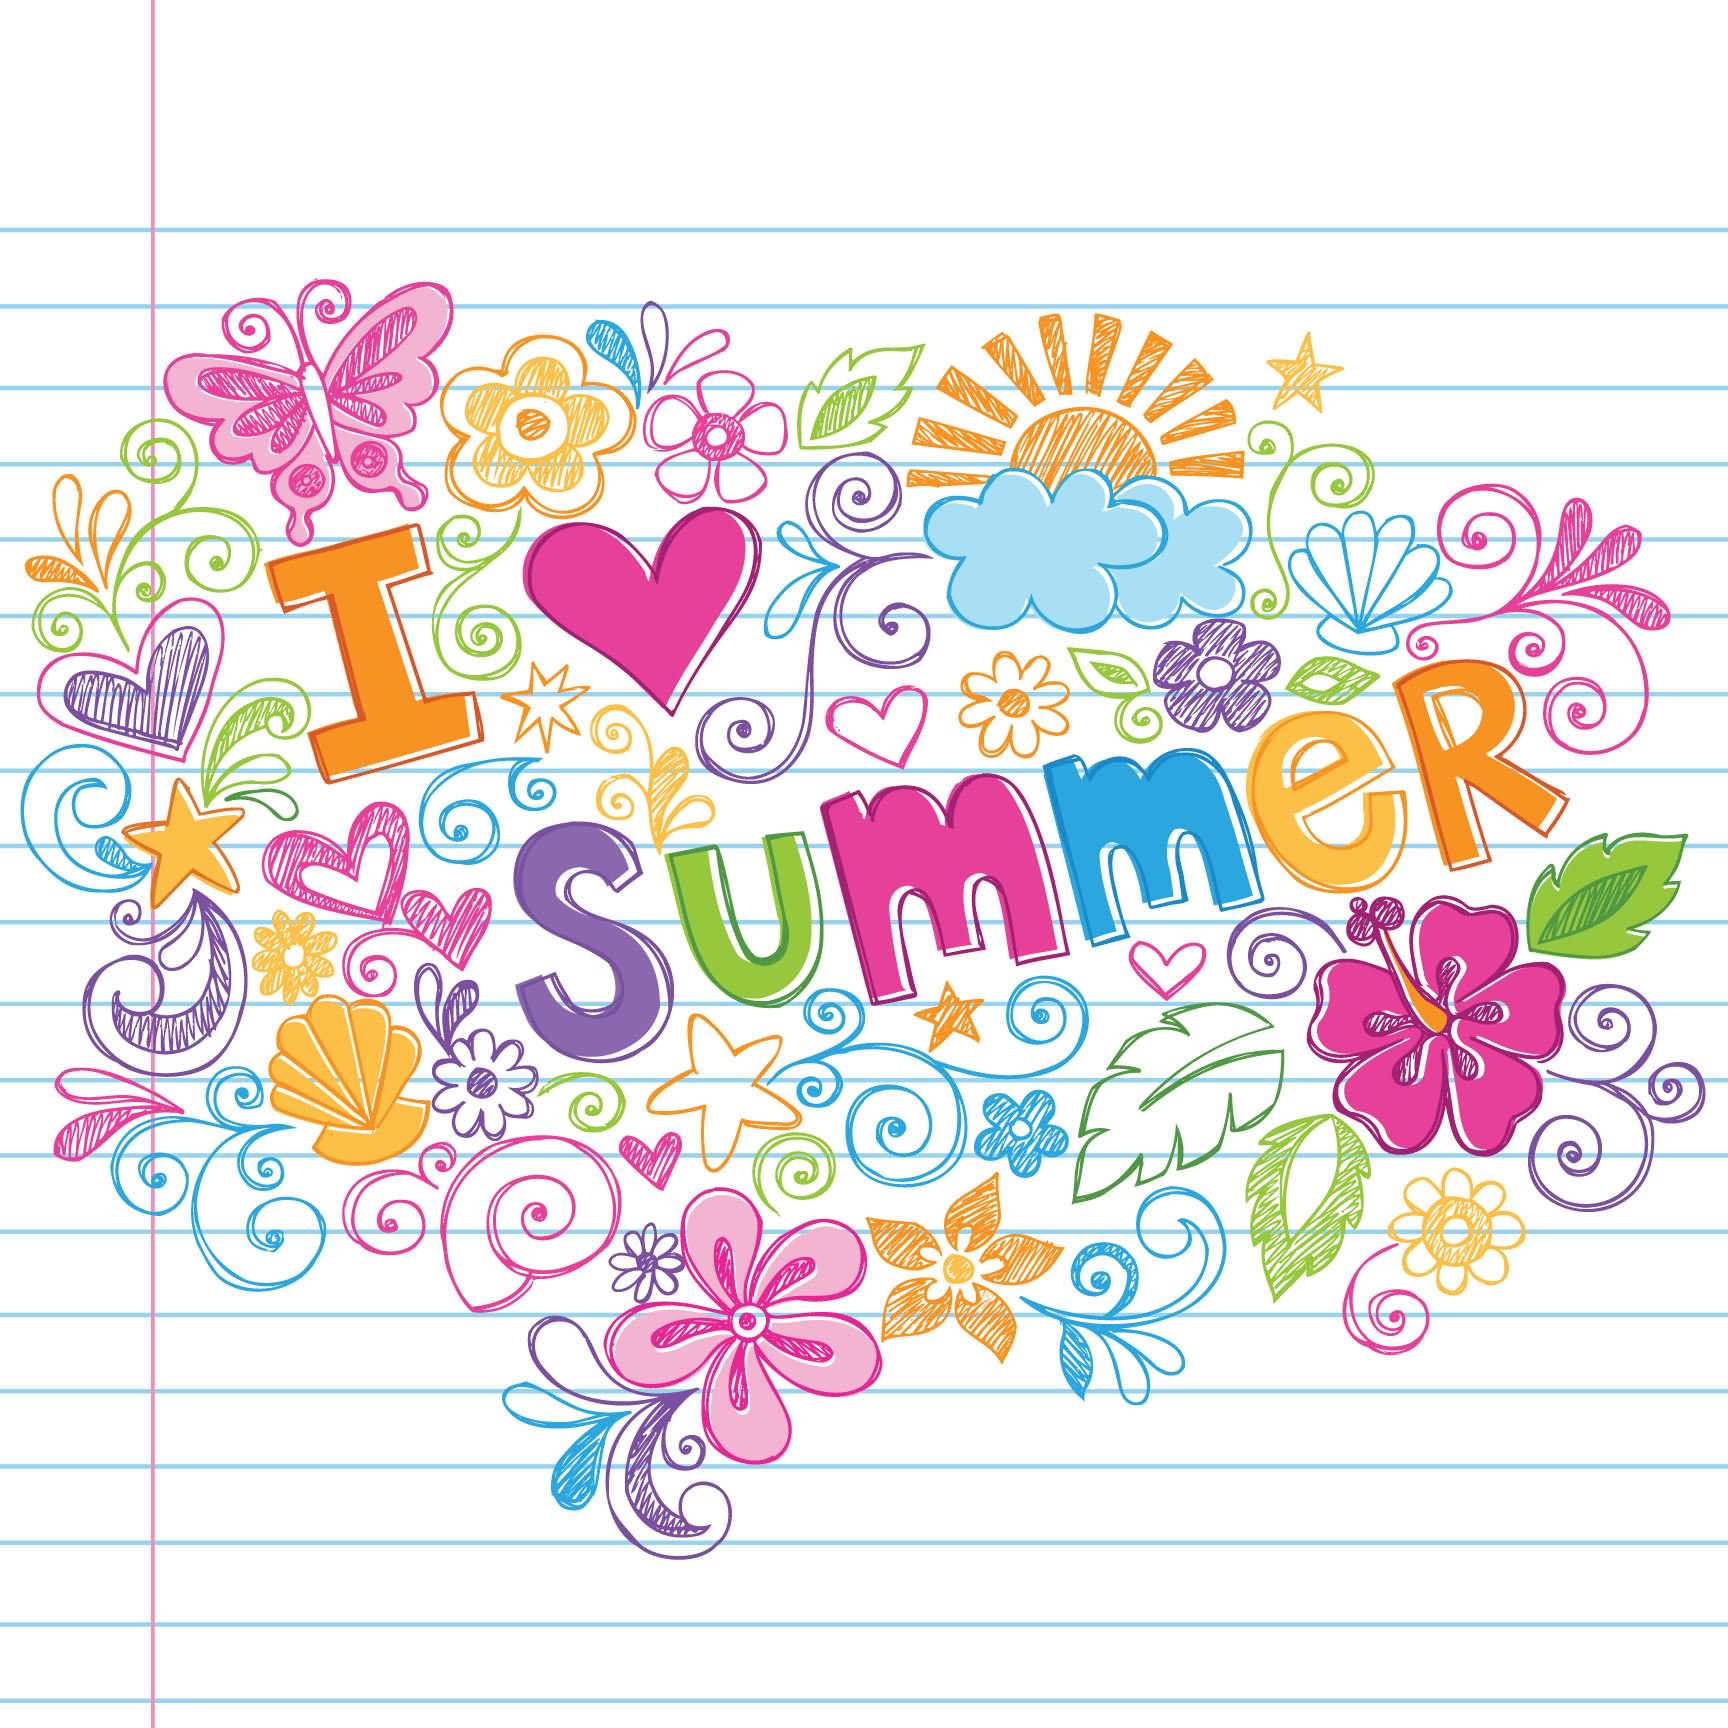 Summer 2 3 clipart free clip art images image 2